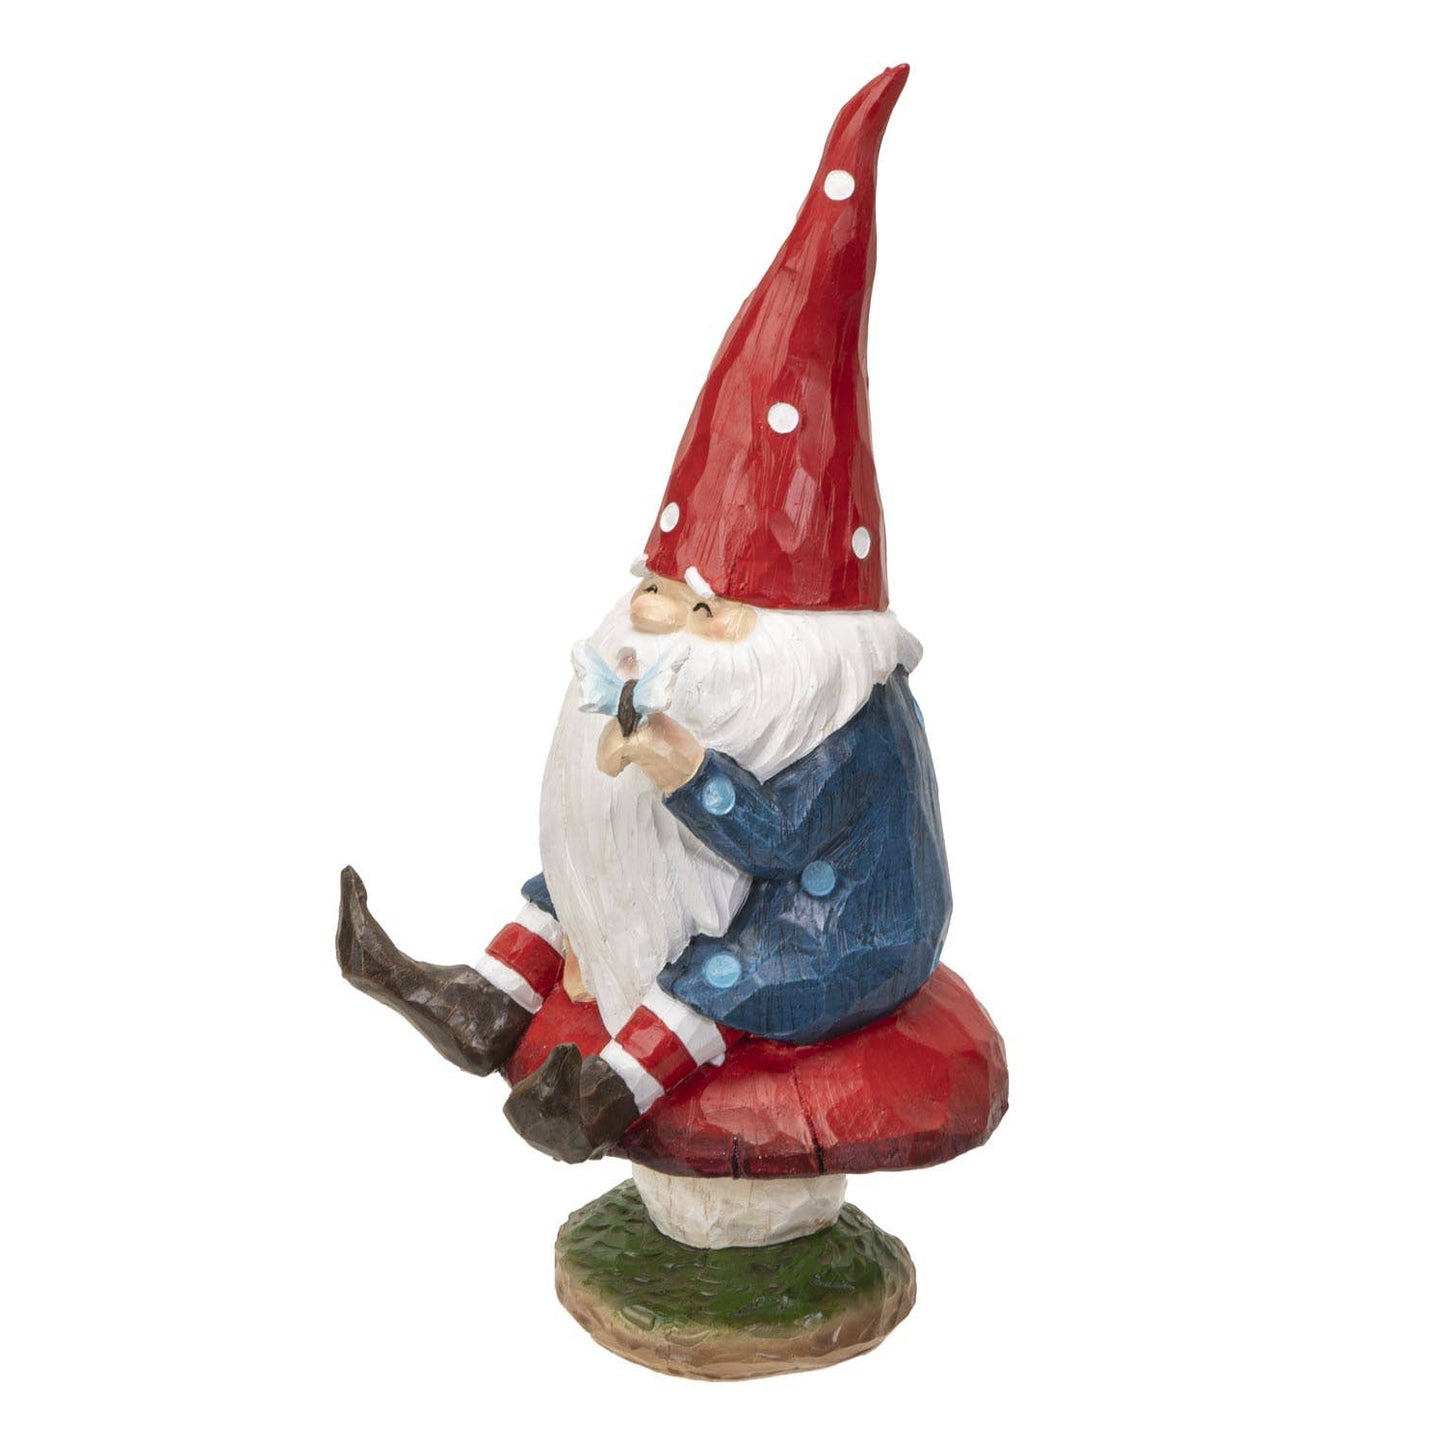 Gnome on Toadstool | Whimsical Indoor Outdoor Garden Decor | 10" Tall